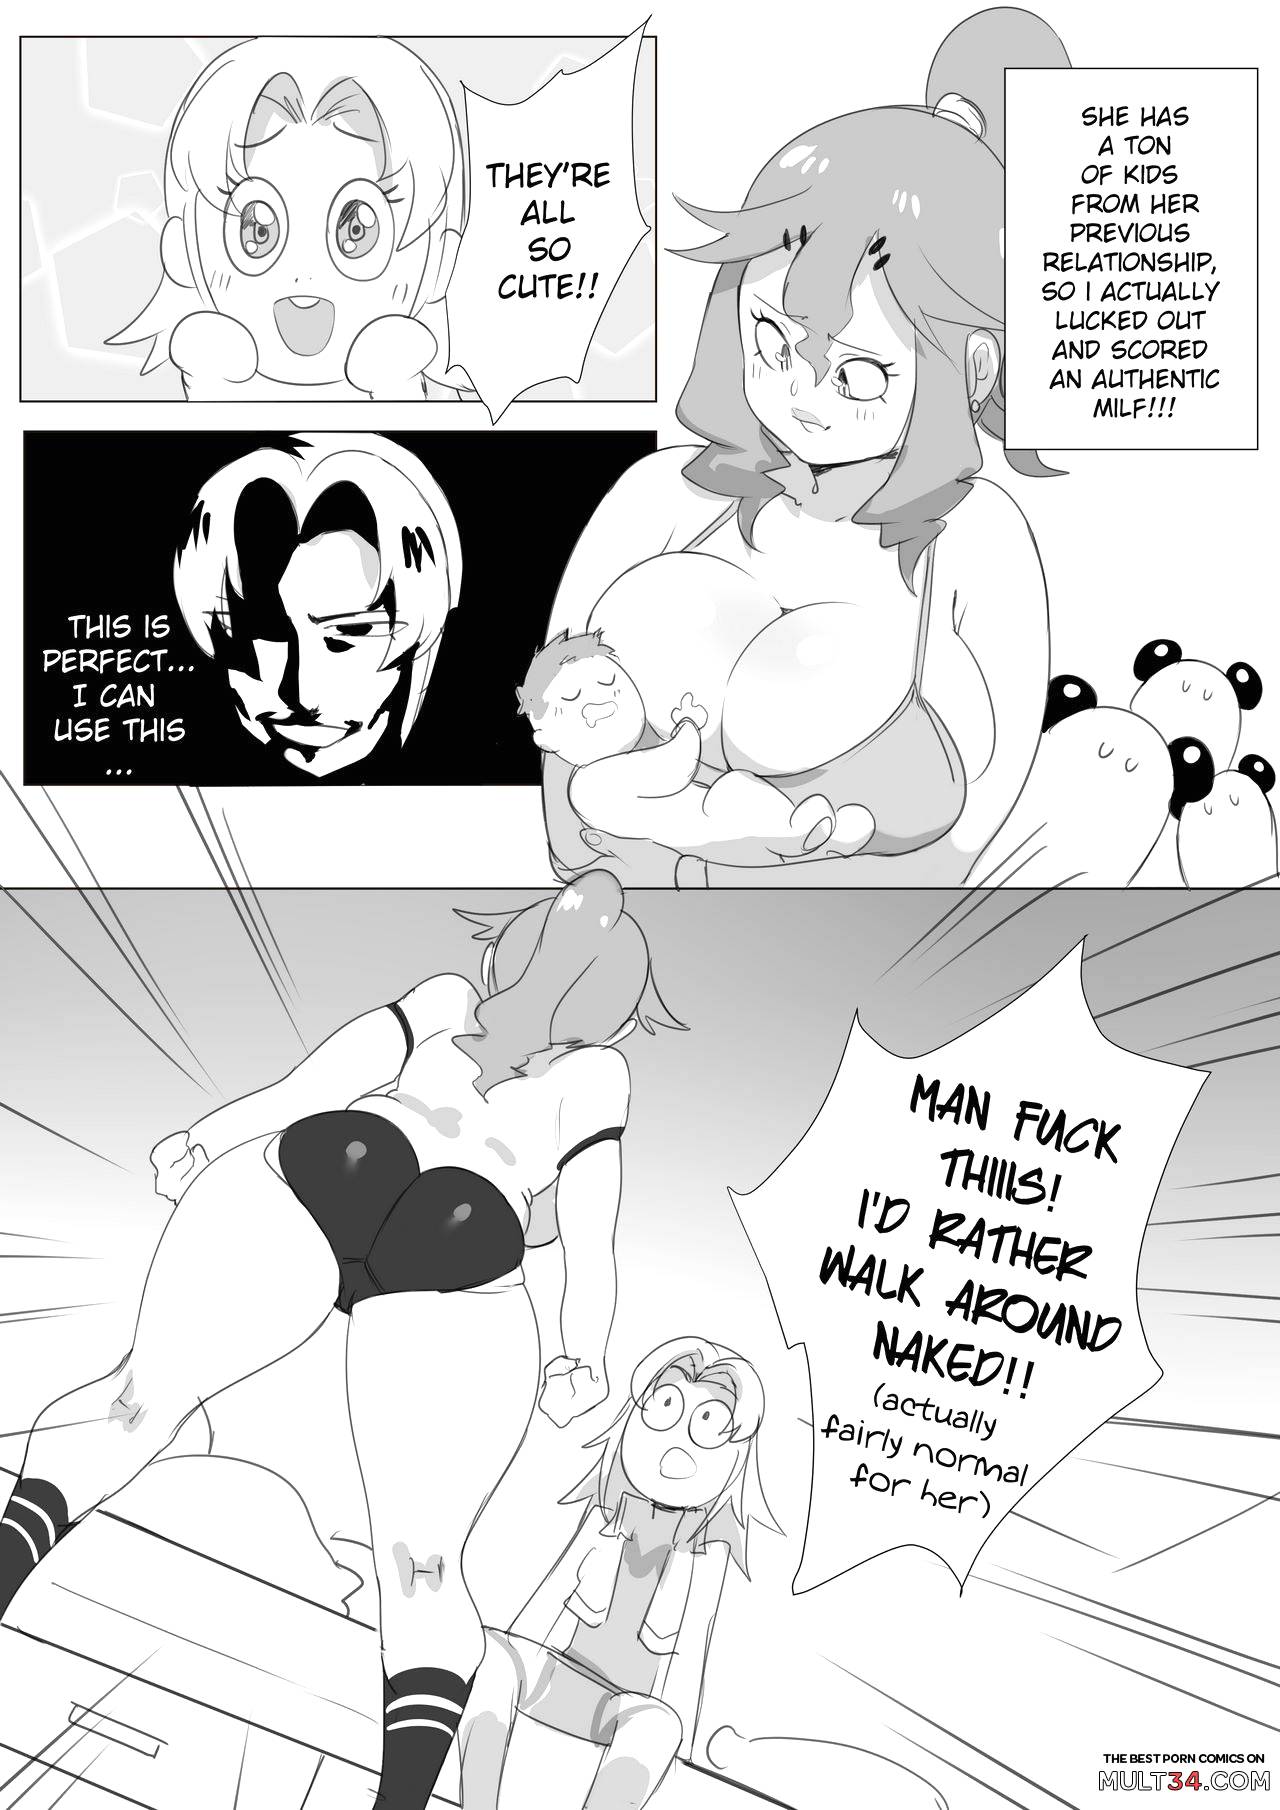 I'm Not A Milf I'm Your Girlfriend You Ass! + Kirk's Training Montage page 4